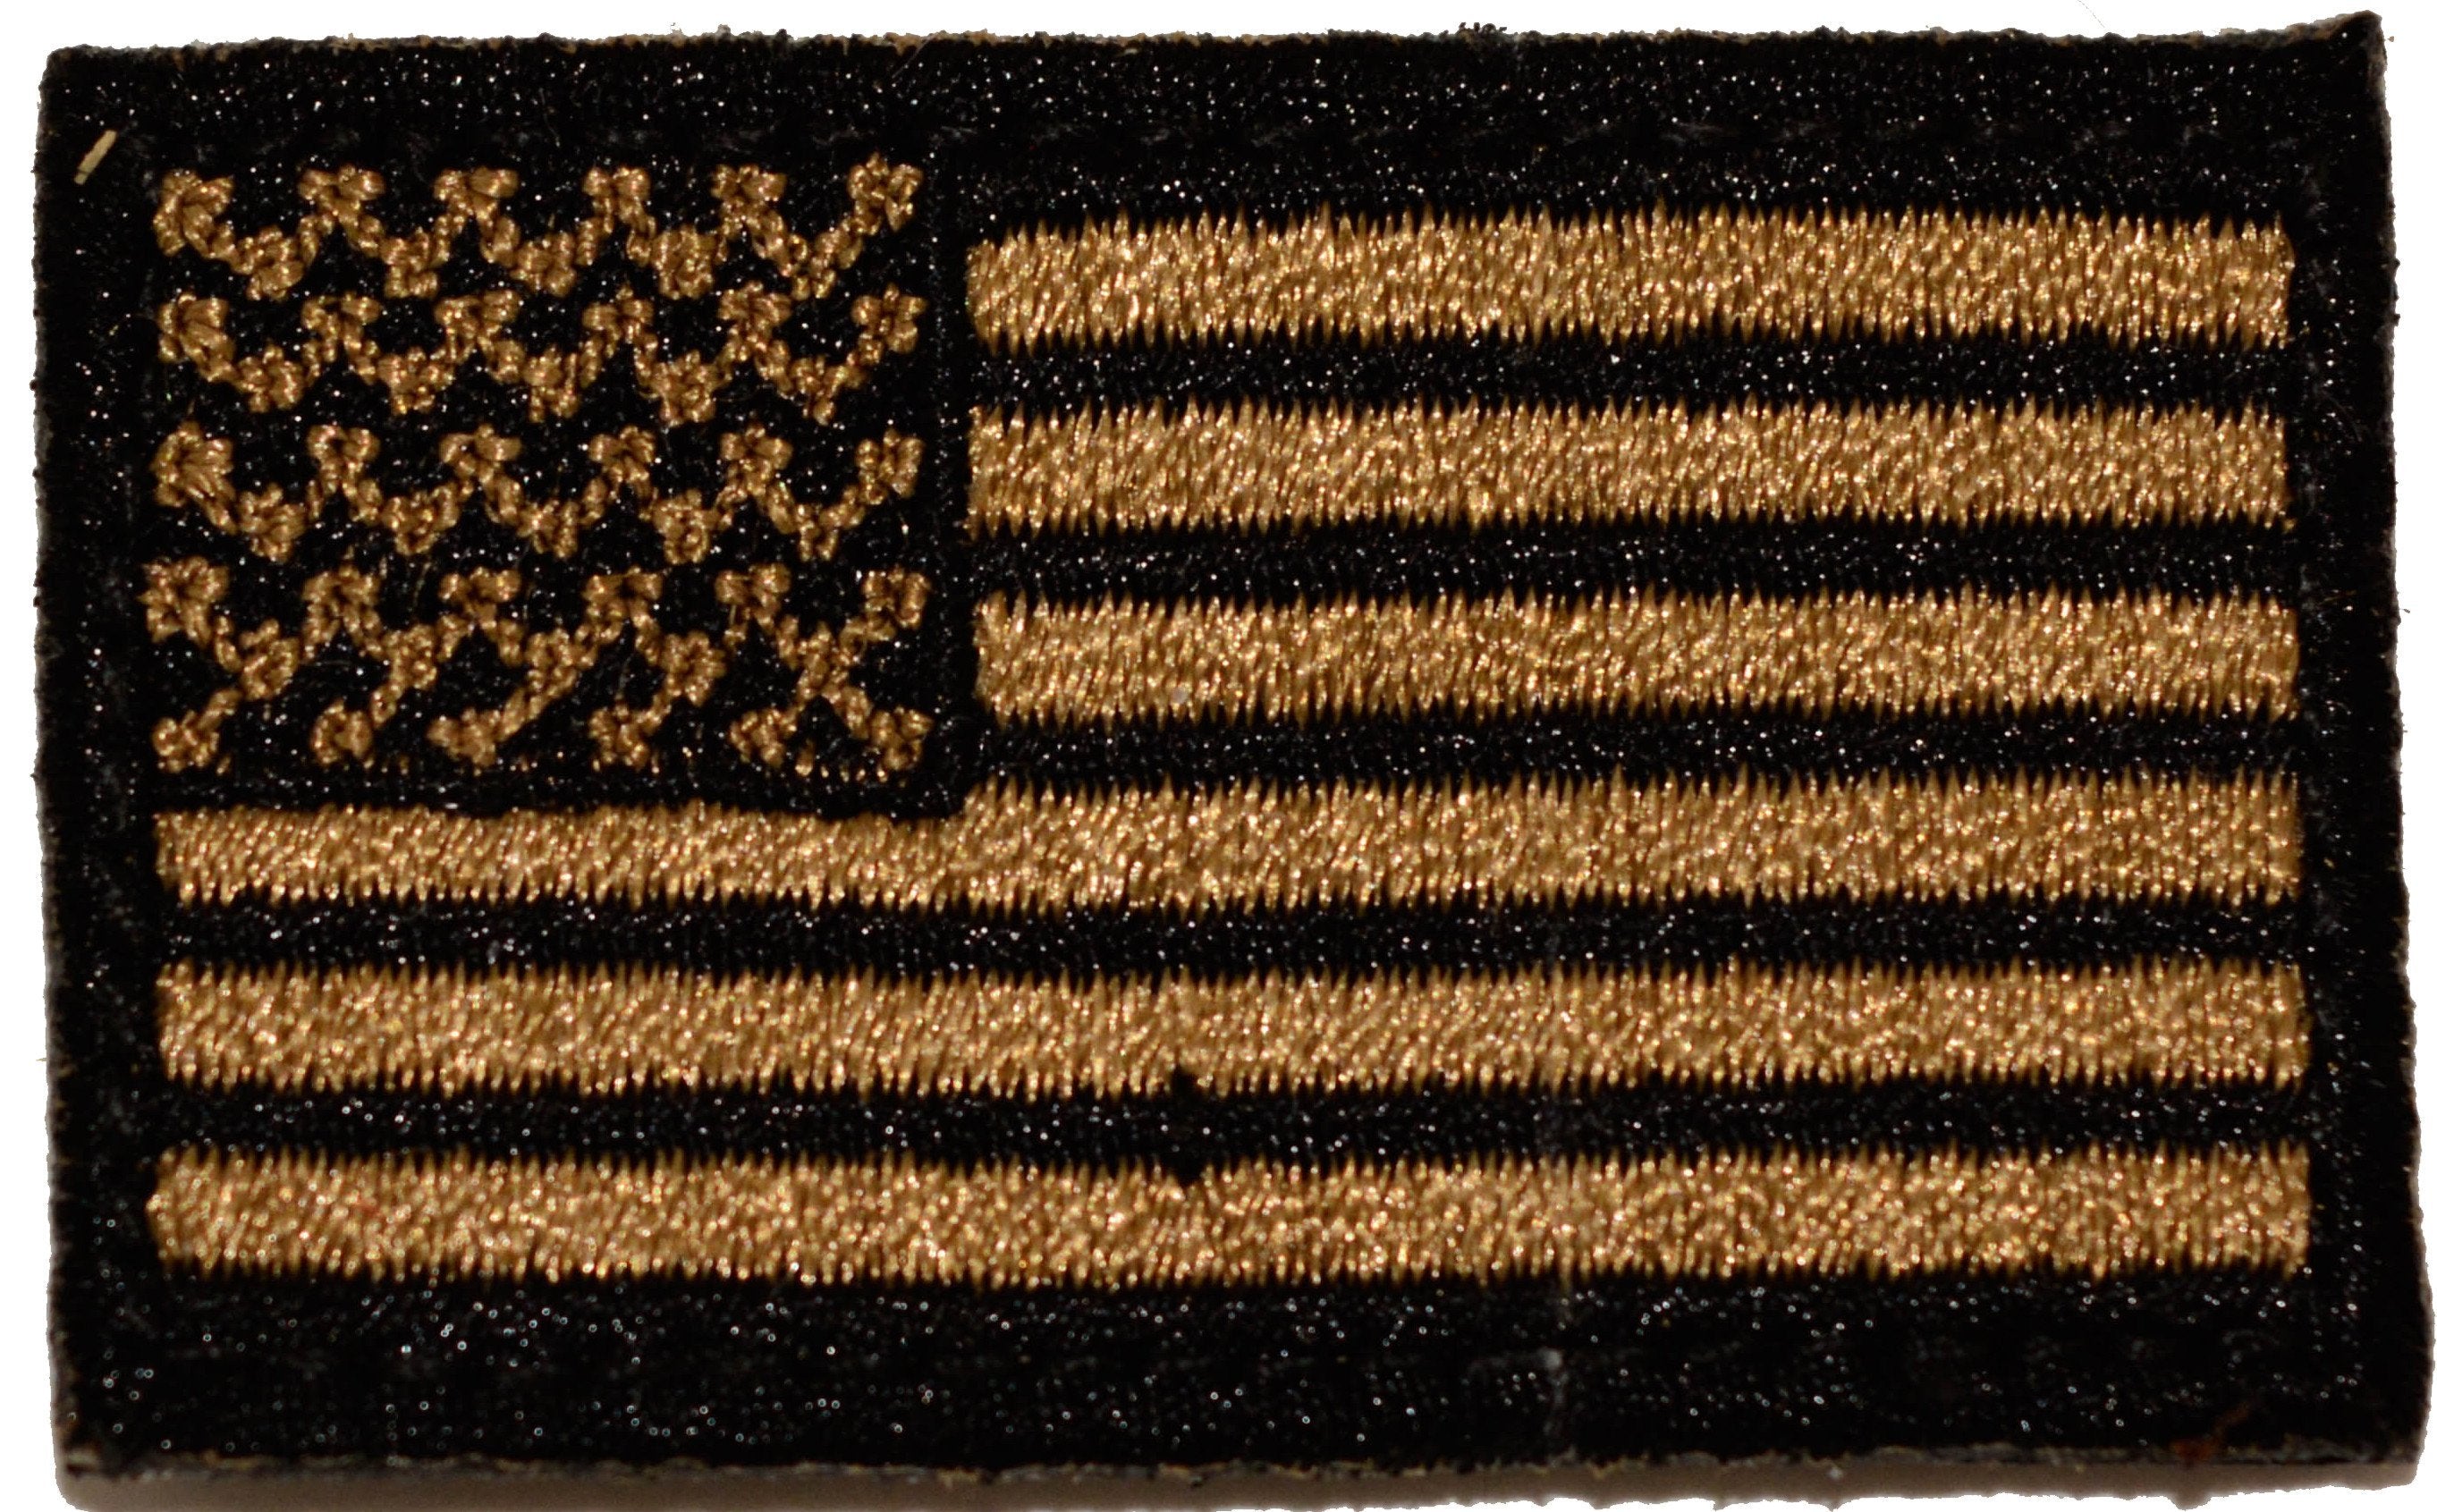 Buy US Tactical American Flag Patch Metallic Gold Army 3 X 2 USA